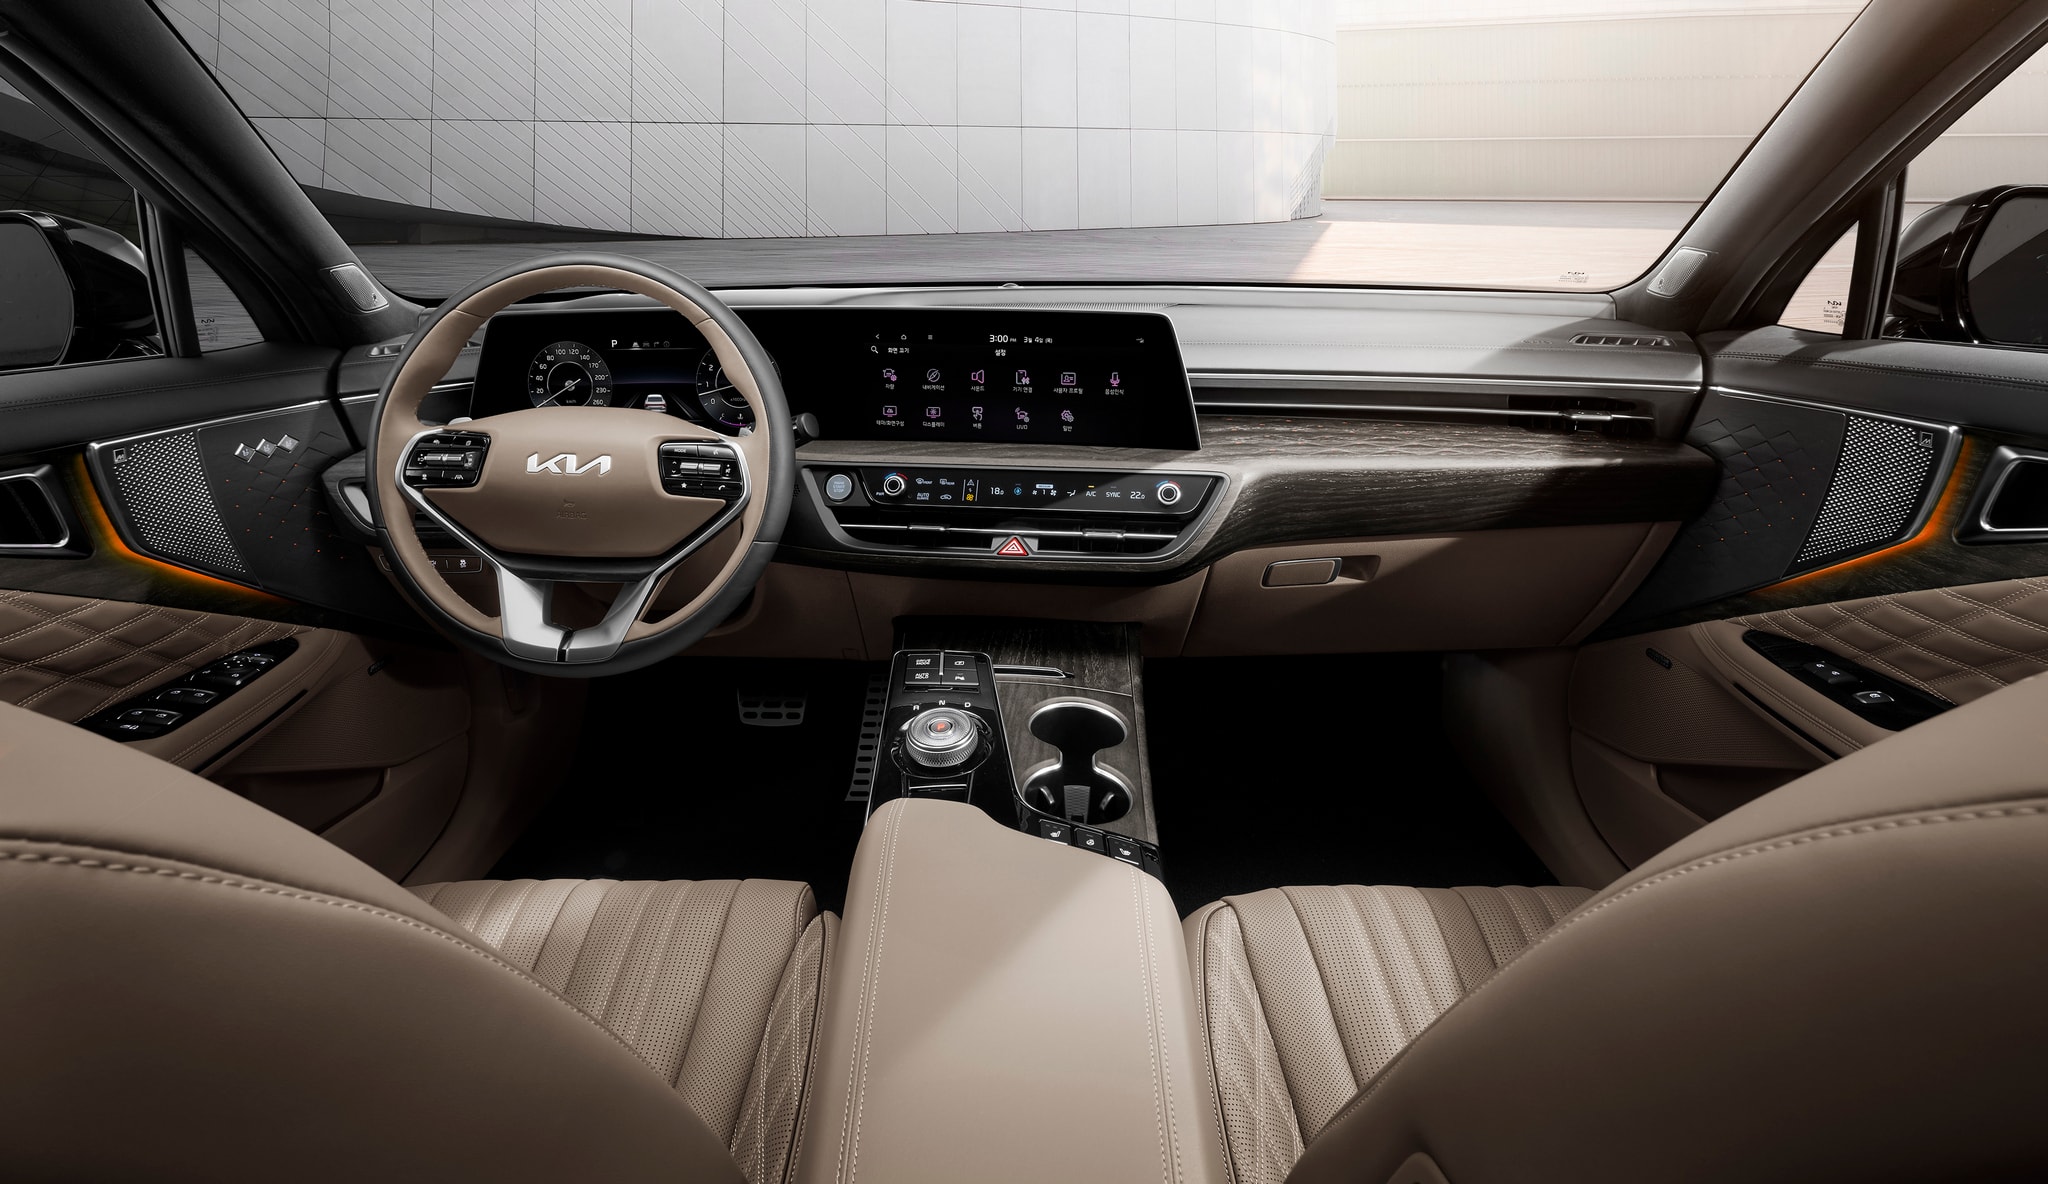 Tech Savory Kia K8 Cabin Reveal Easily Puts To Shame Cadenza S Dated Interior 157196 1 